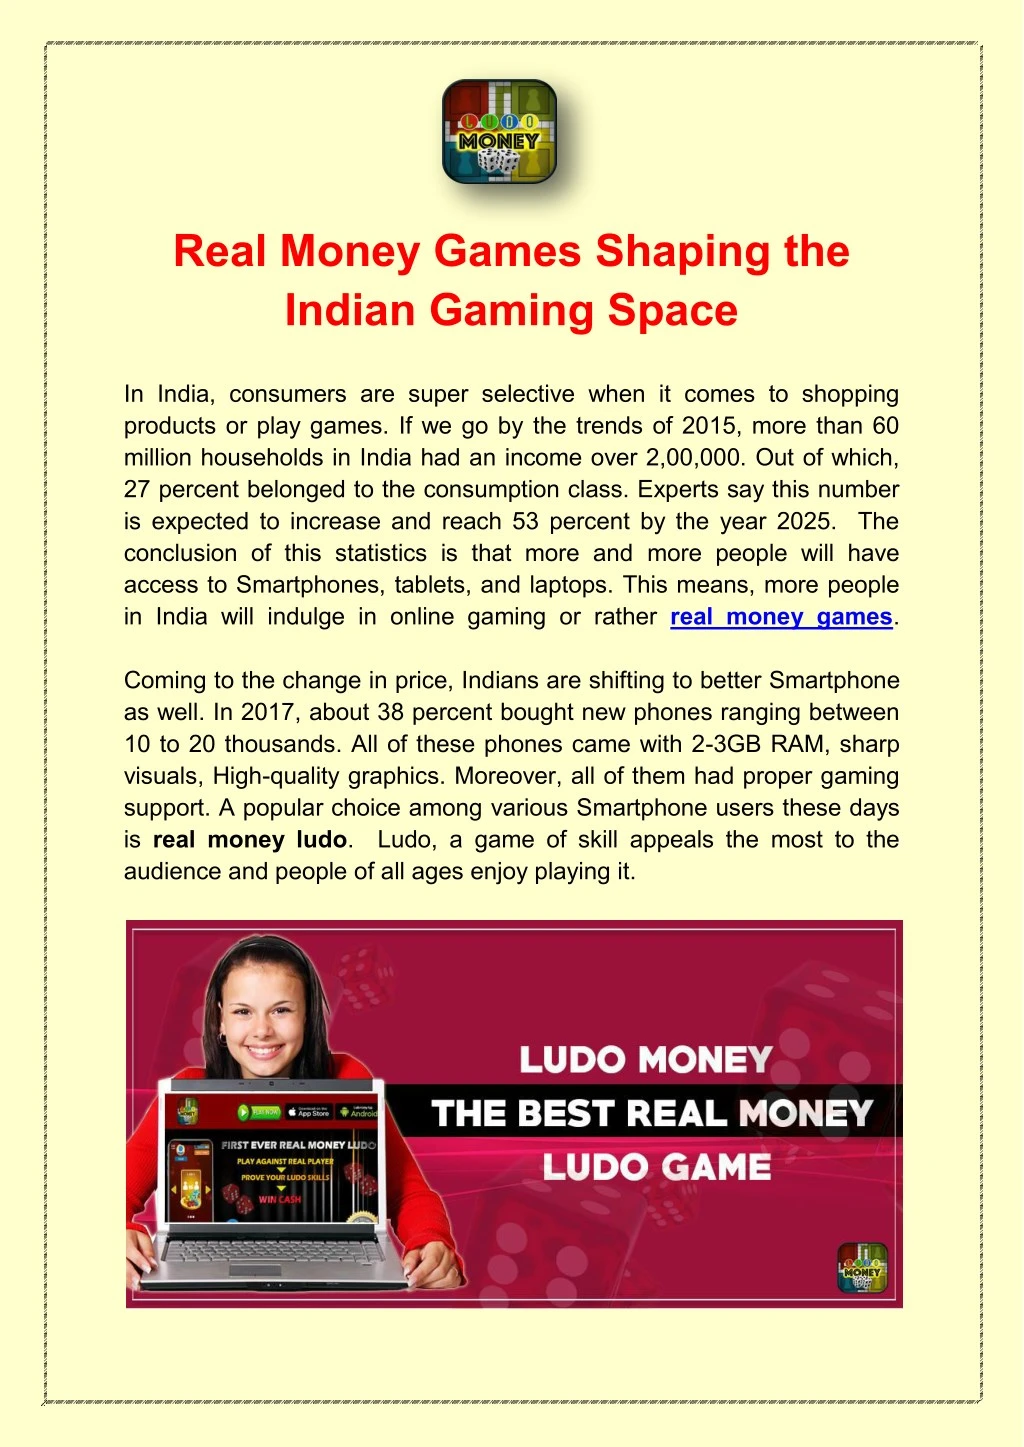 real money games shaping the indian gaming space